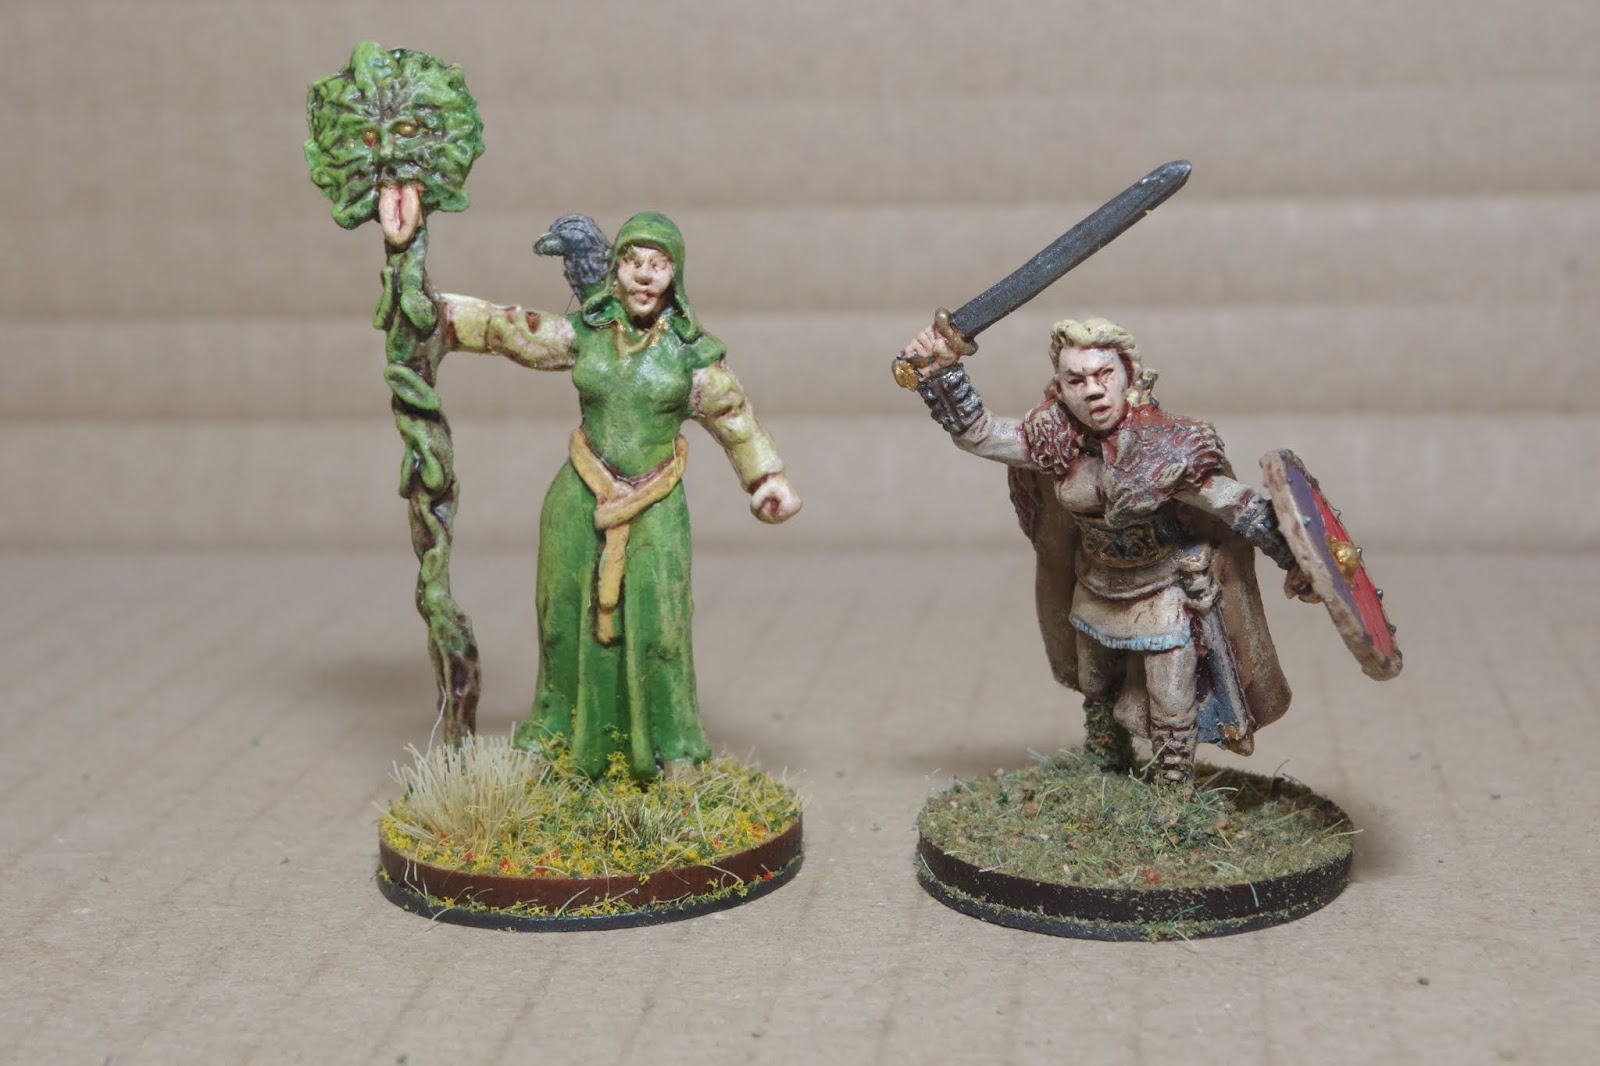 The Dice Bag Lady Shows Off More Painted Shieldmaidens